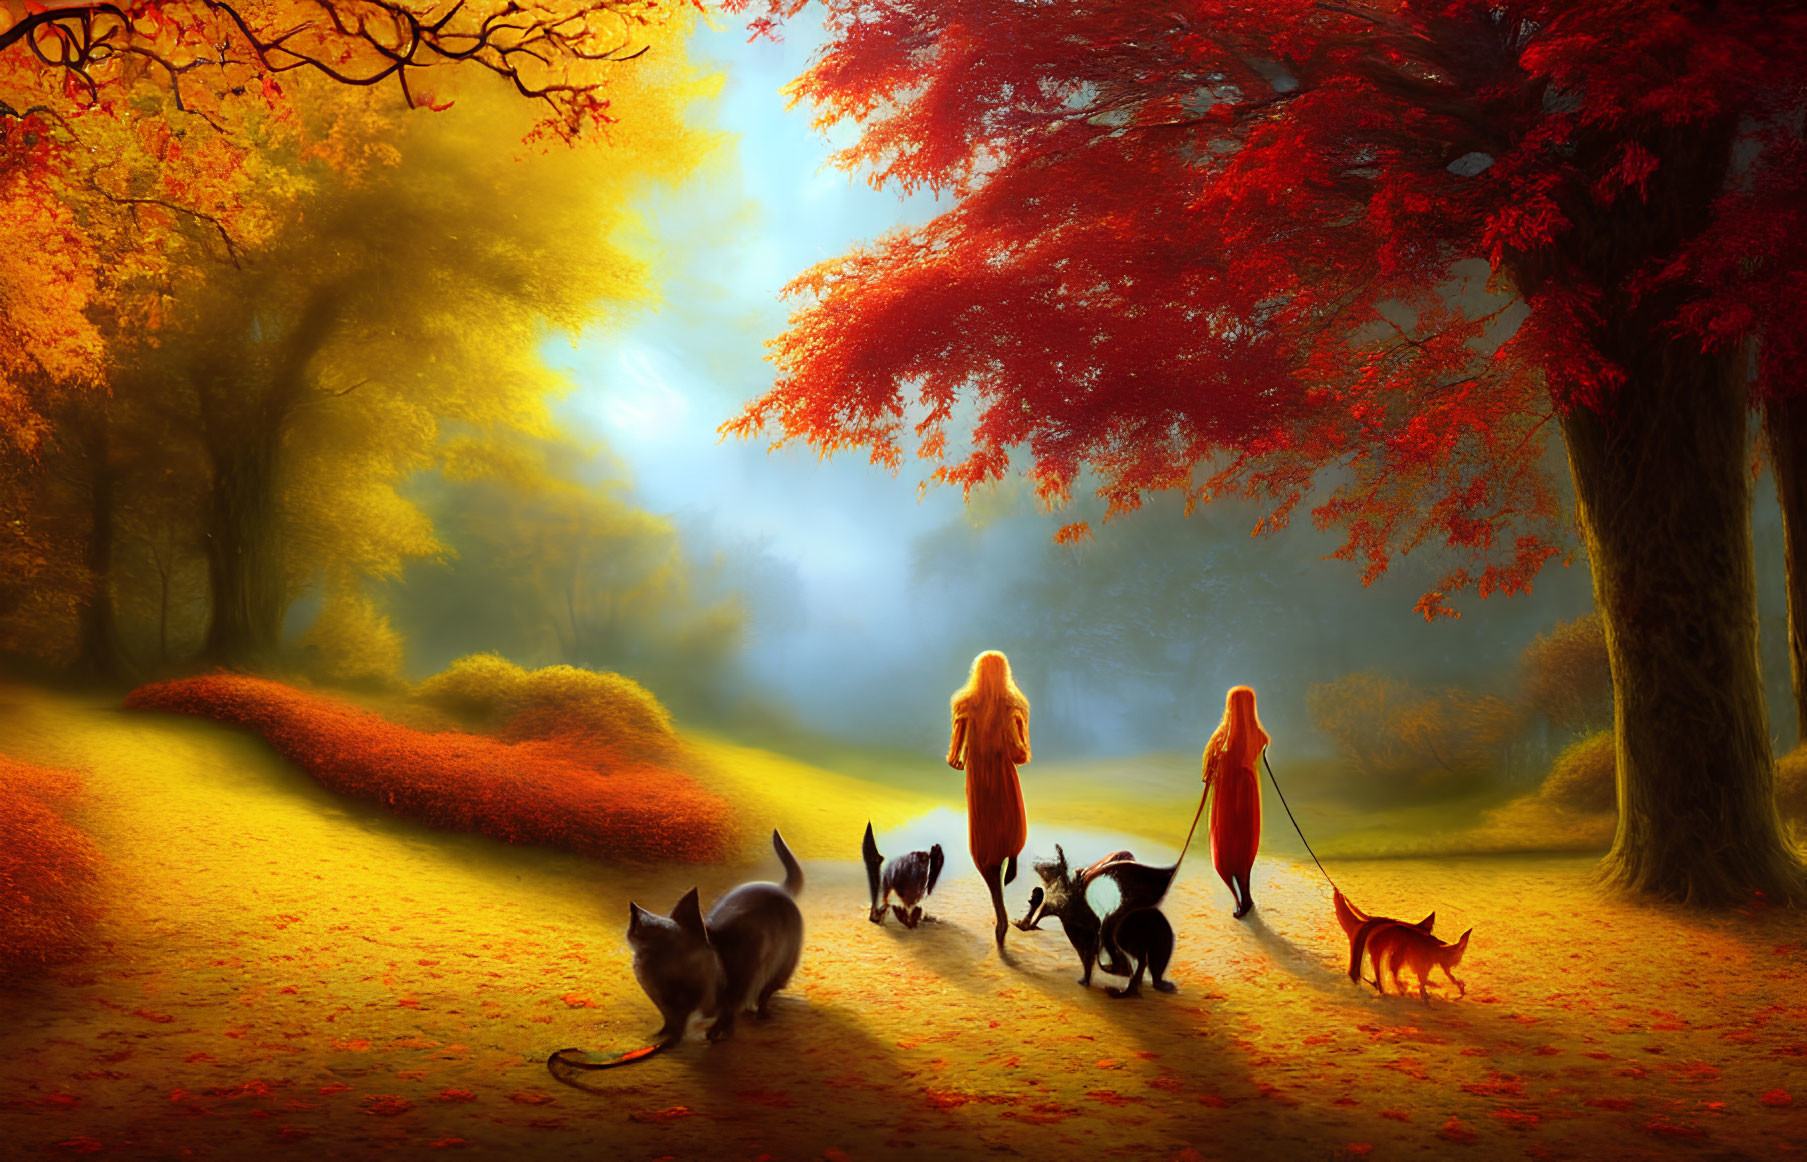 Autumn forest path with two people and cats under soft light